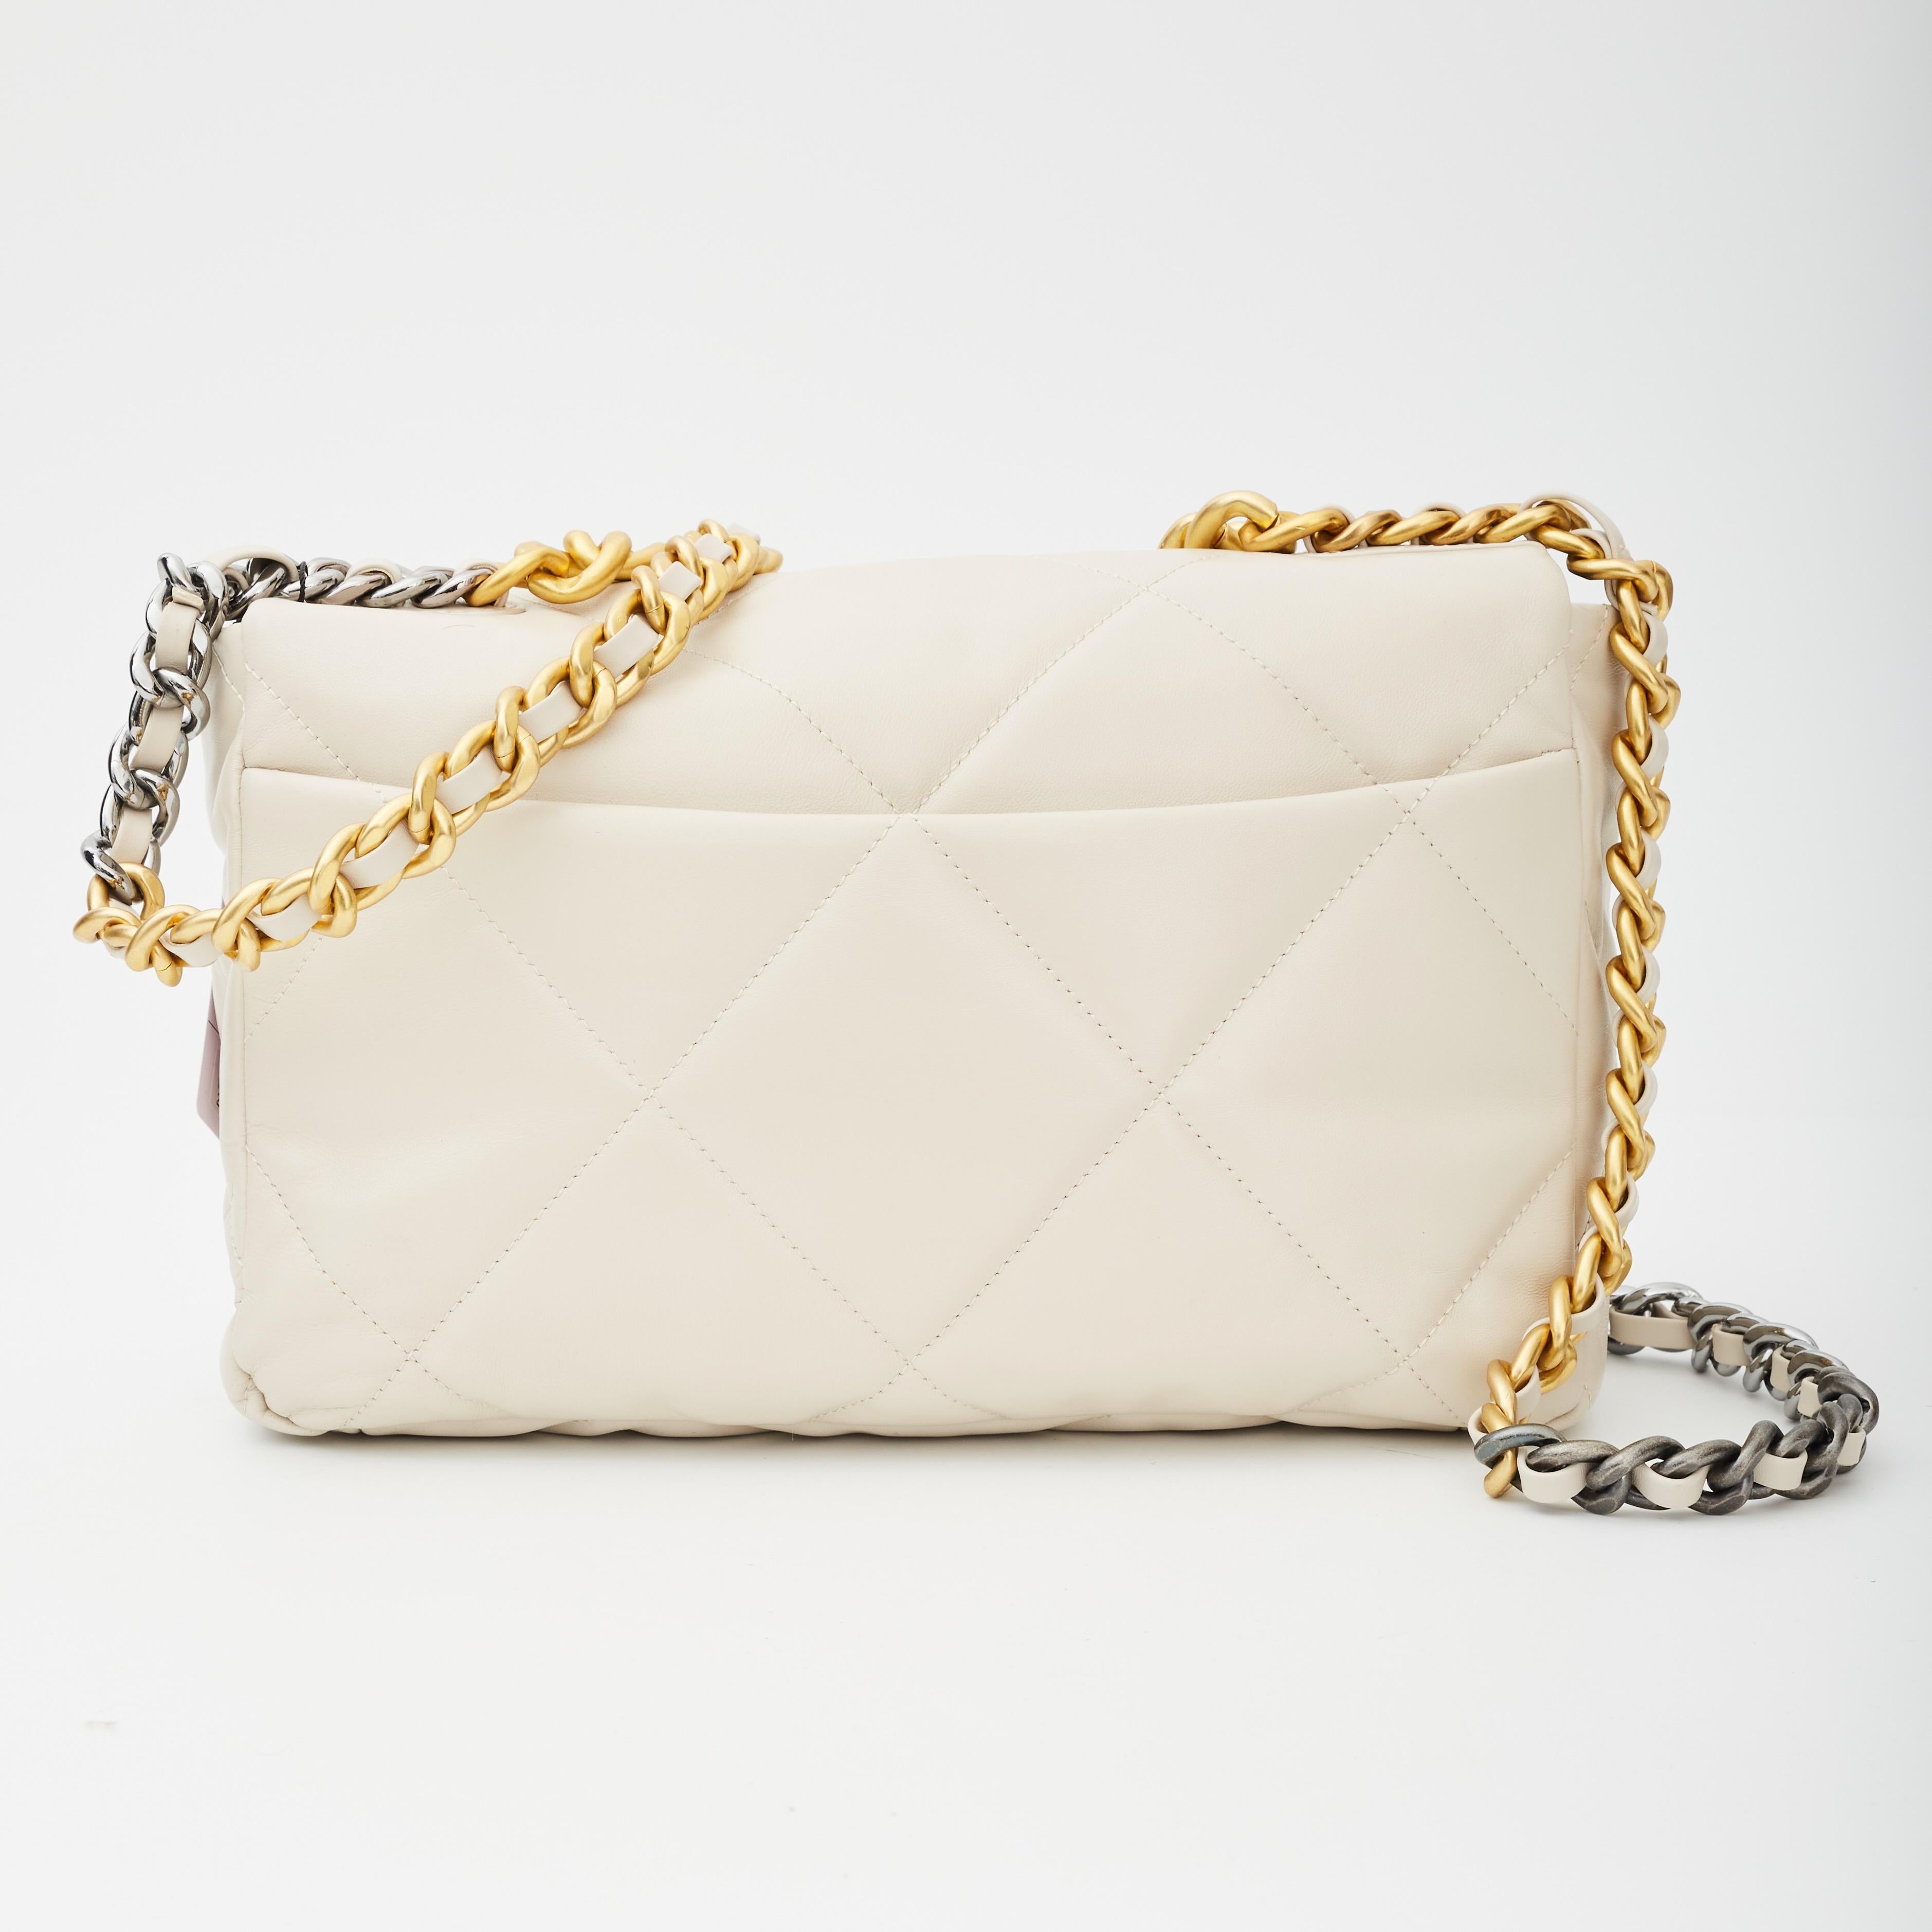 Chanel Shoulder Bag. Neutrals Leather. Multitonal Hardware. Chain-Link Handle & Chain-Link Shoulder Strap. Single Exterior Pocket. Nylon Lining & Single Interior Pocket. Turn-Lock Closure at Front.

COLOR: White
MATERIAL: Leather
ITEM